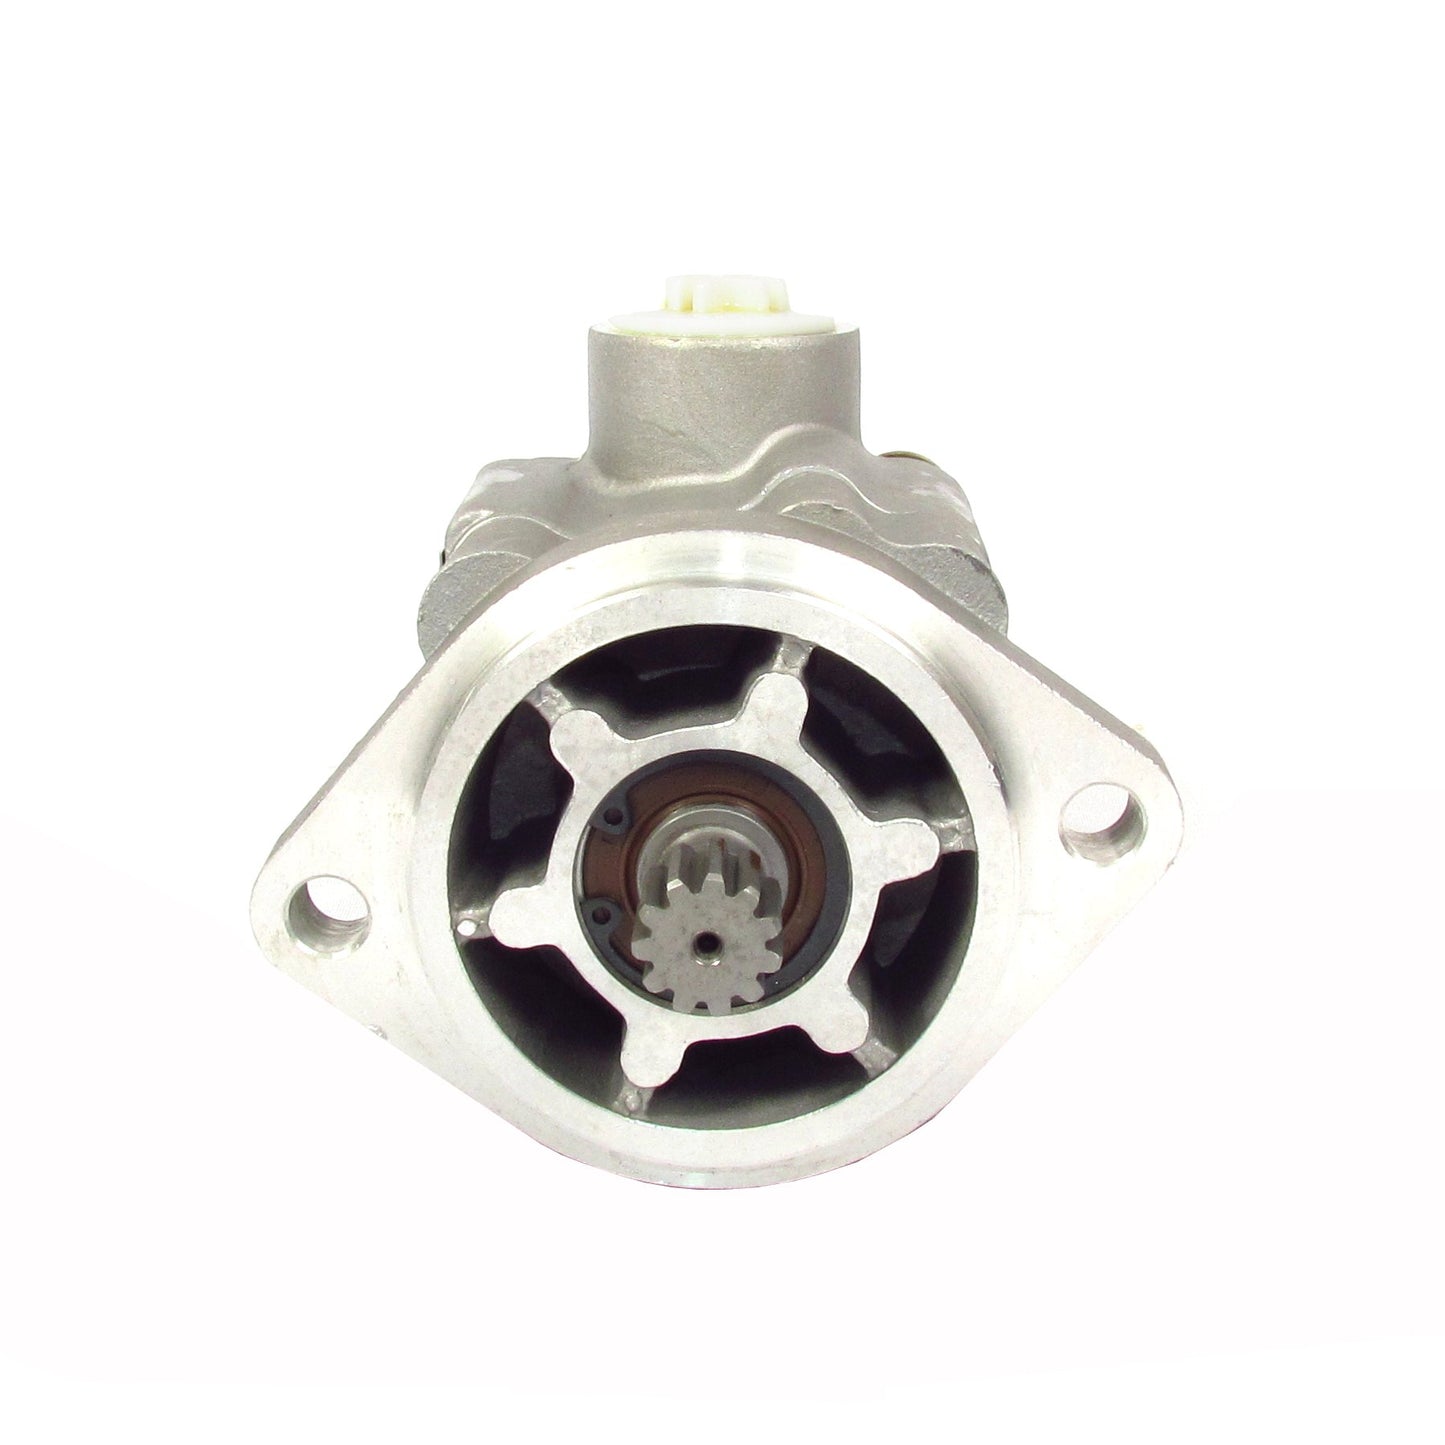 Fortpro Power Steering Pump Compatible with Detroit S60 and CAT 3406 Engines | F255708